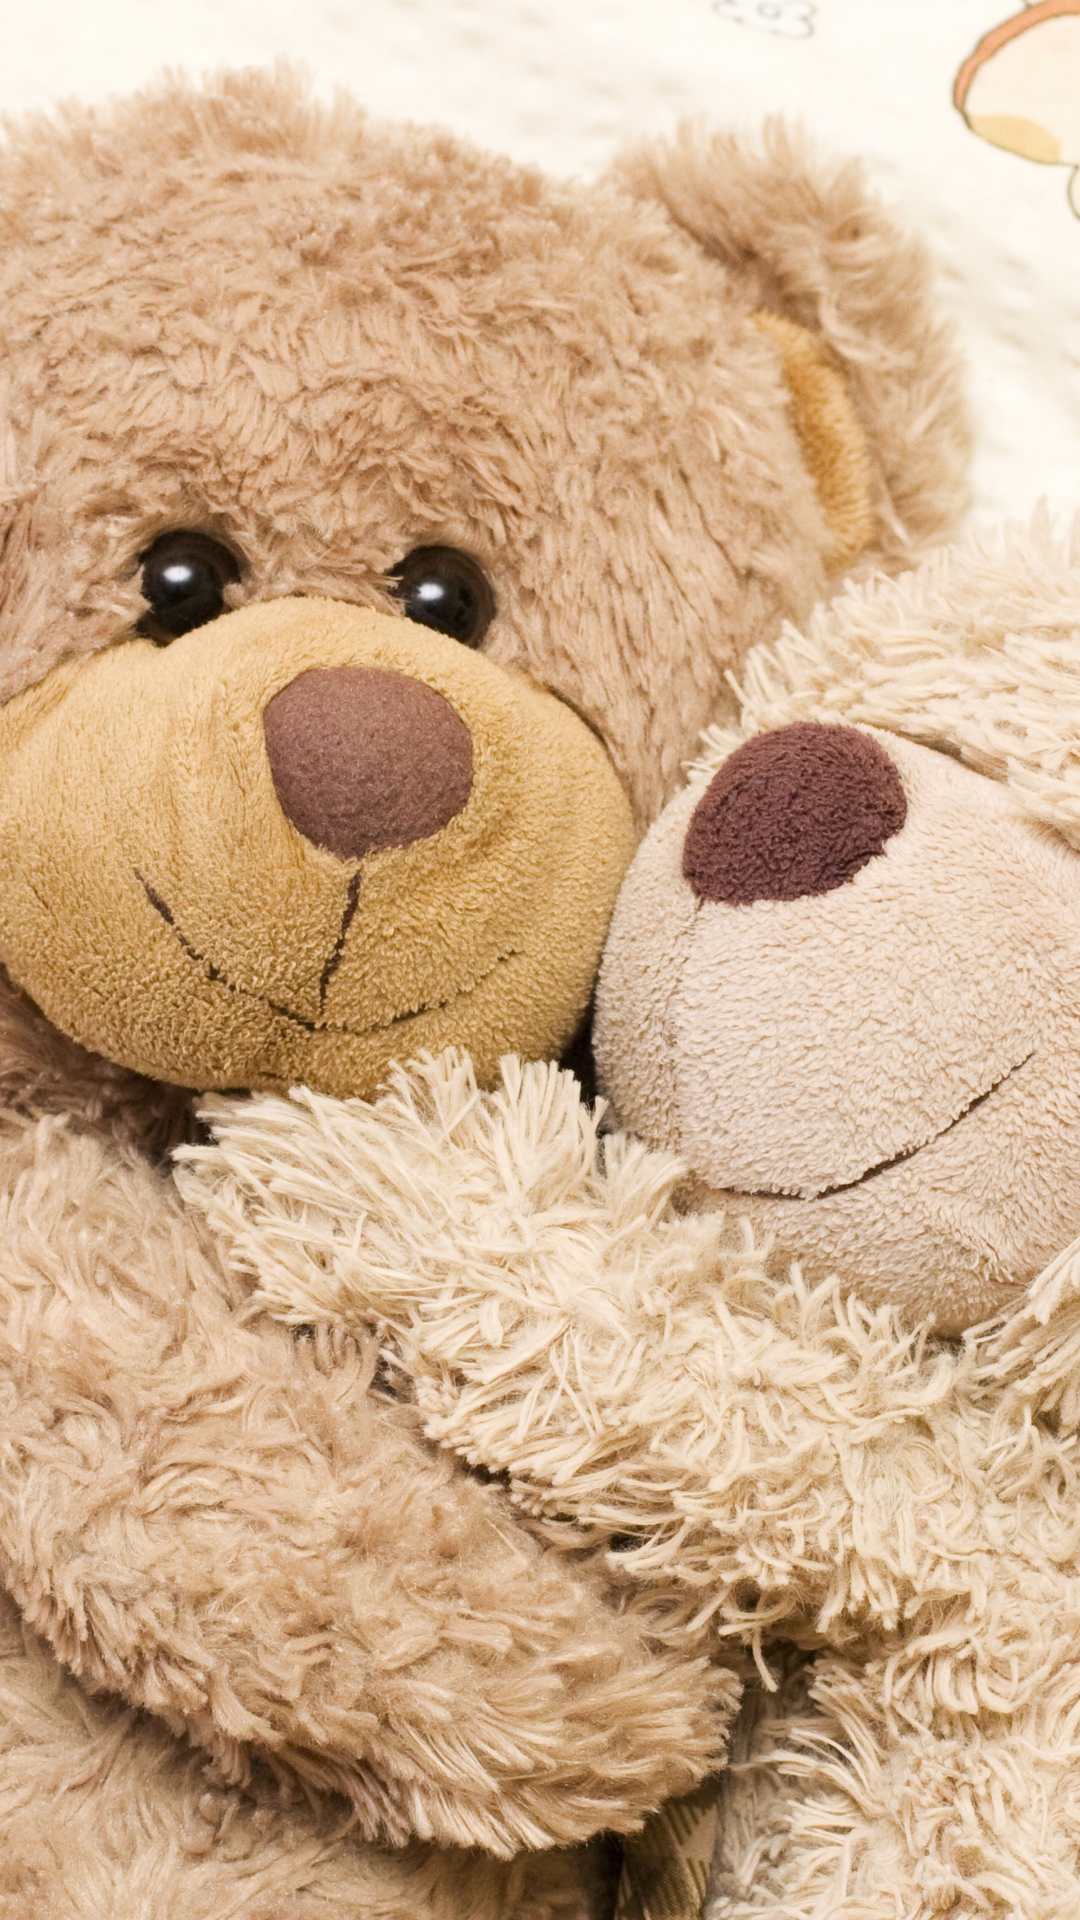 To Click On Teddy Bear Hug Day Wallpaper Then Choose Save